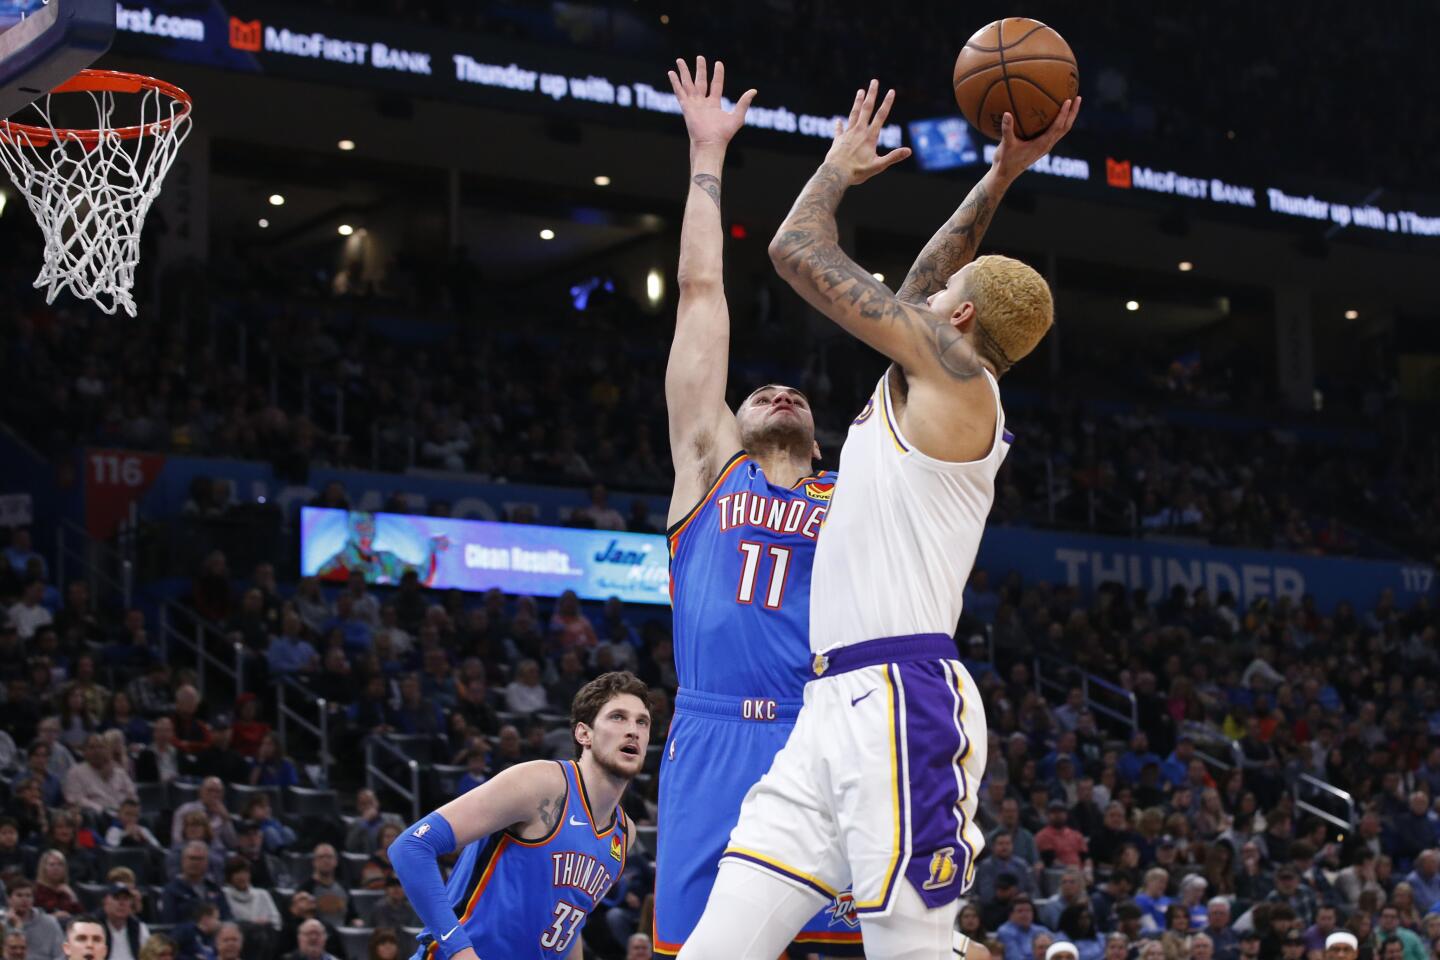 Lakers forward Kyle Kuzma gets up a shot against Thunder forward Abdel Nader (11) during the first half of a game Jan. 11.